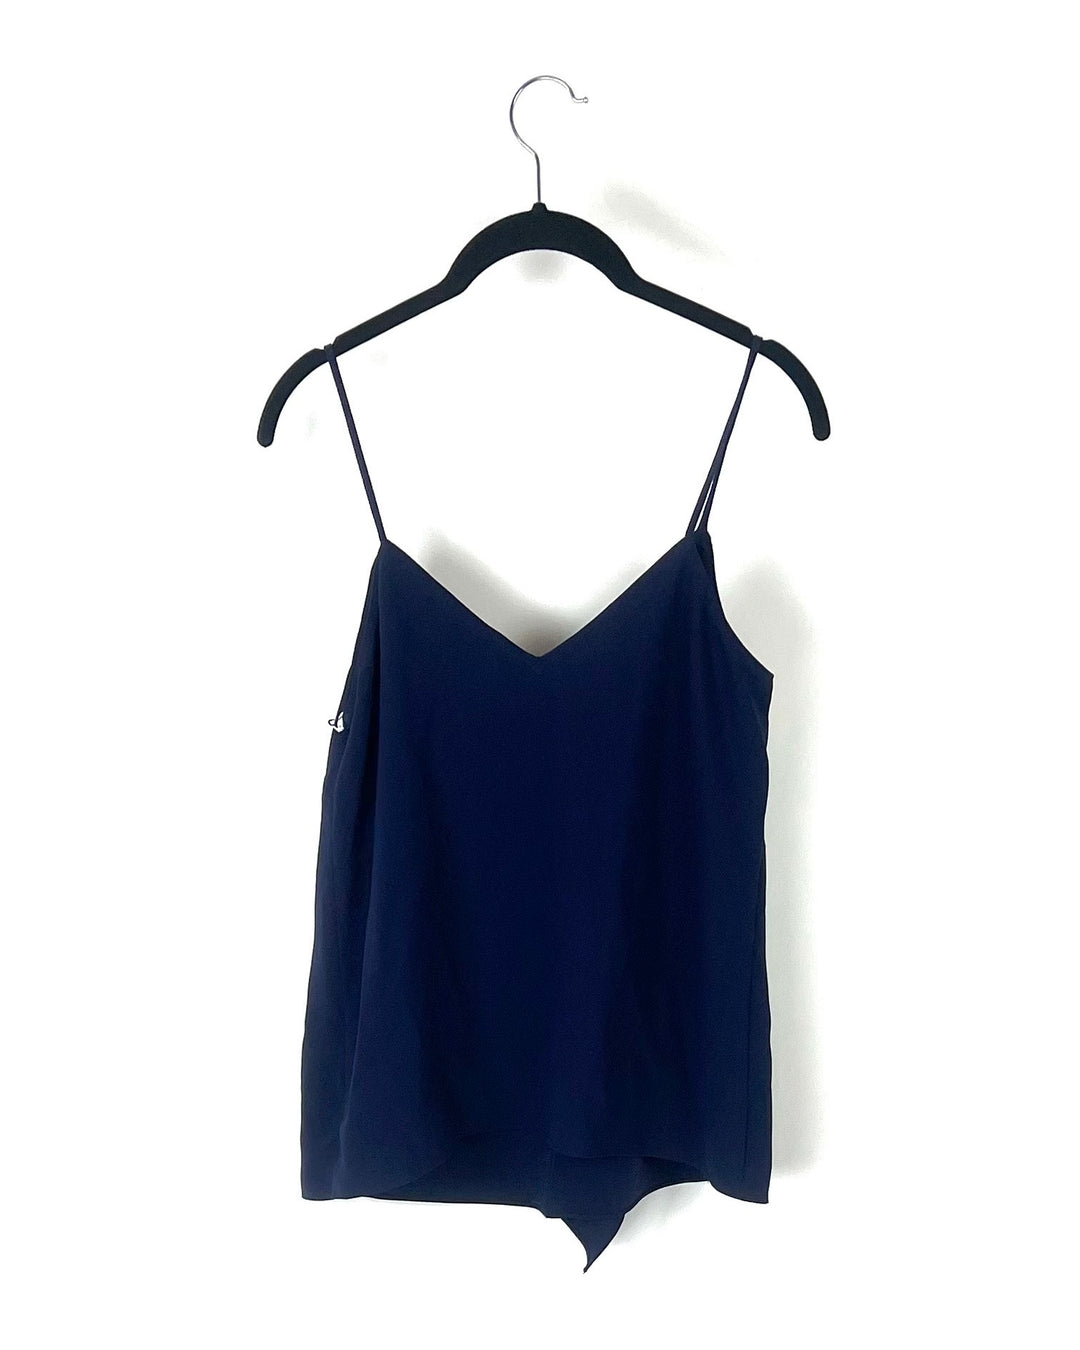 Navy Blue Blouse - Small